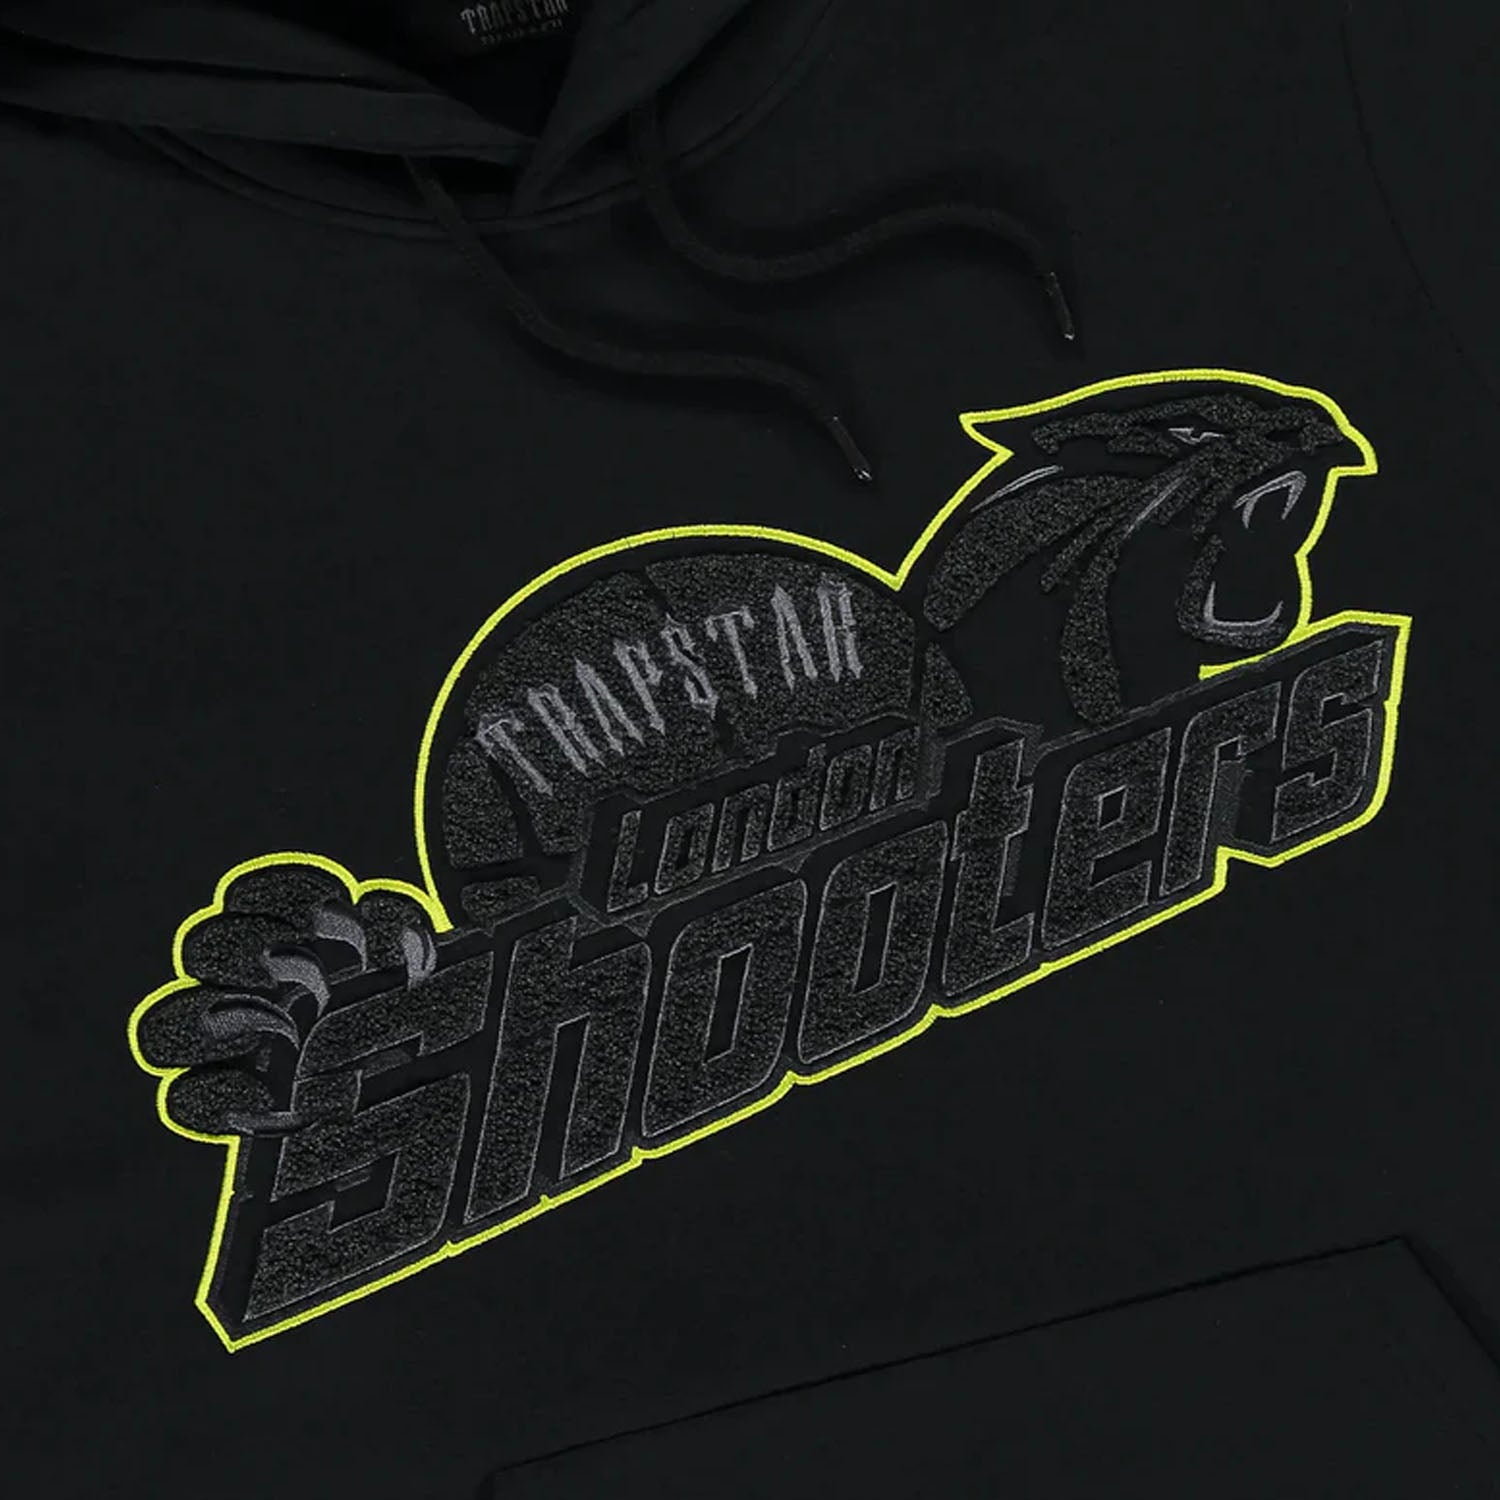 Trapstar Shooters Hooded Tracksuit - Black / Lime Green